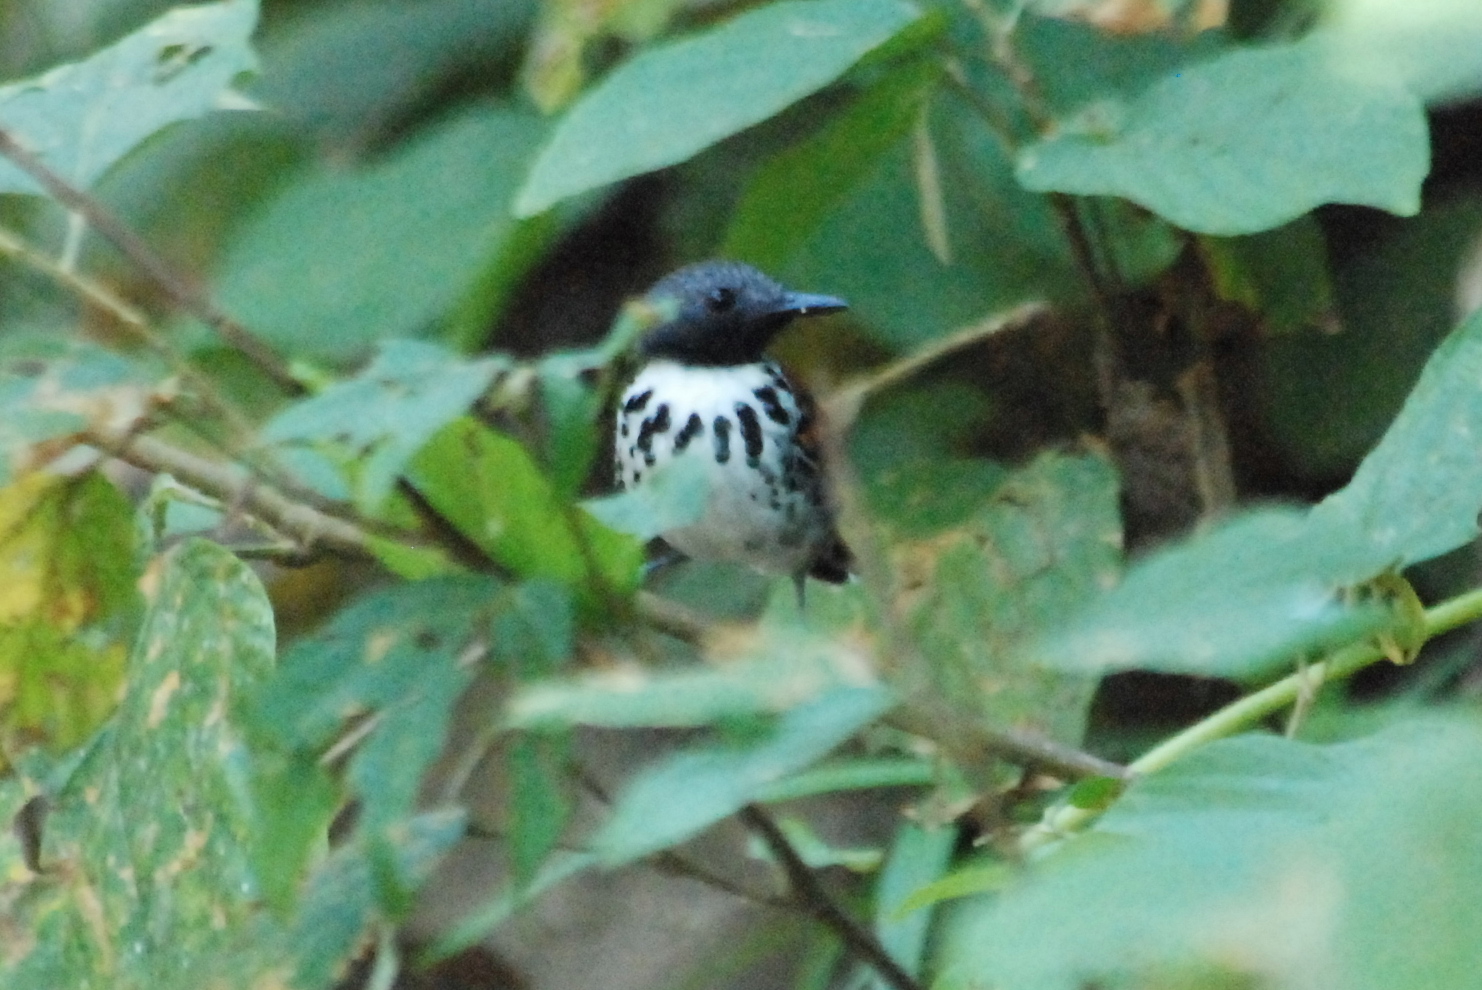 Click picture to see more Spotted Antbirds.